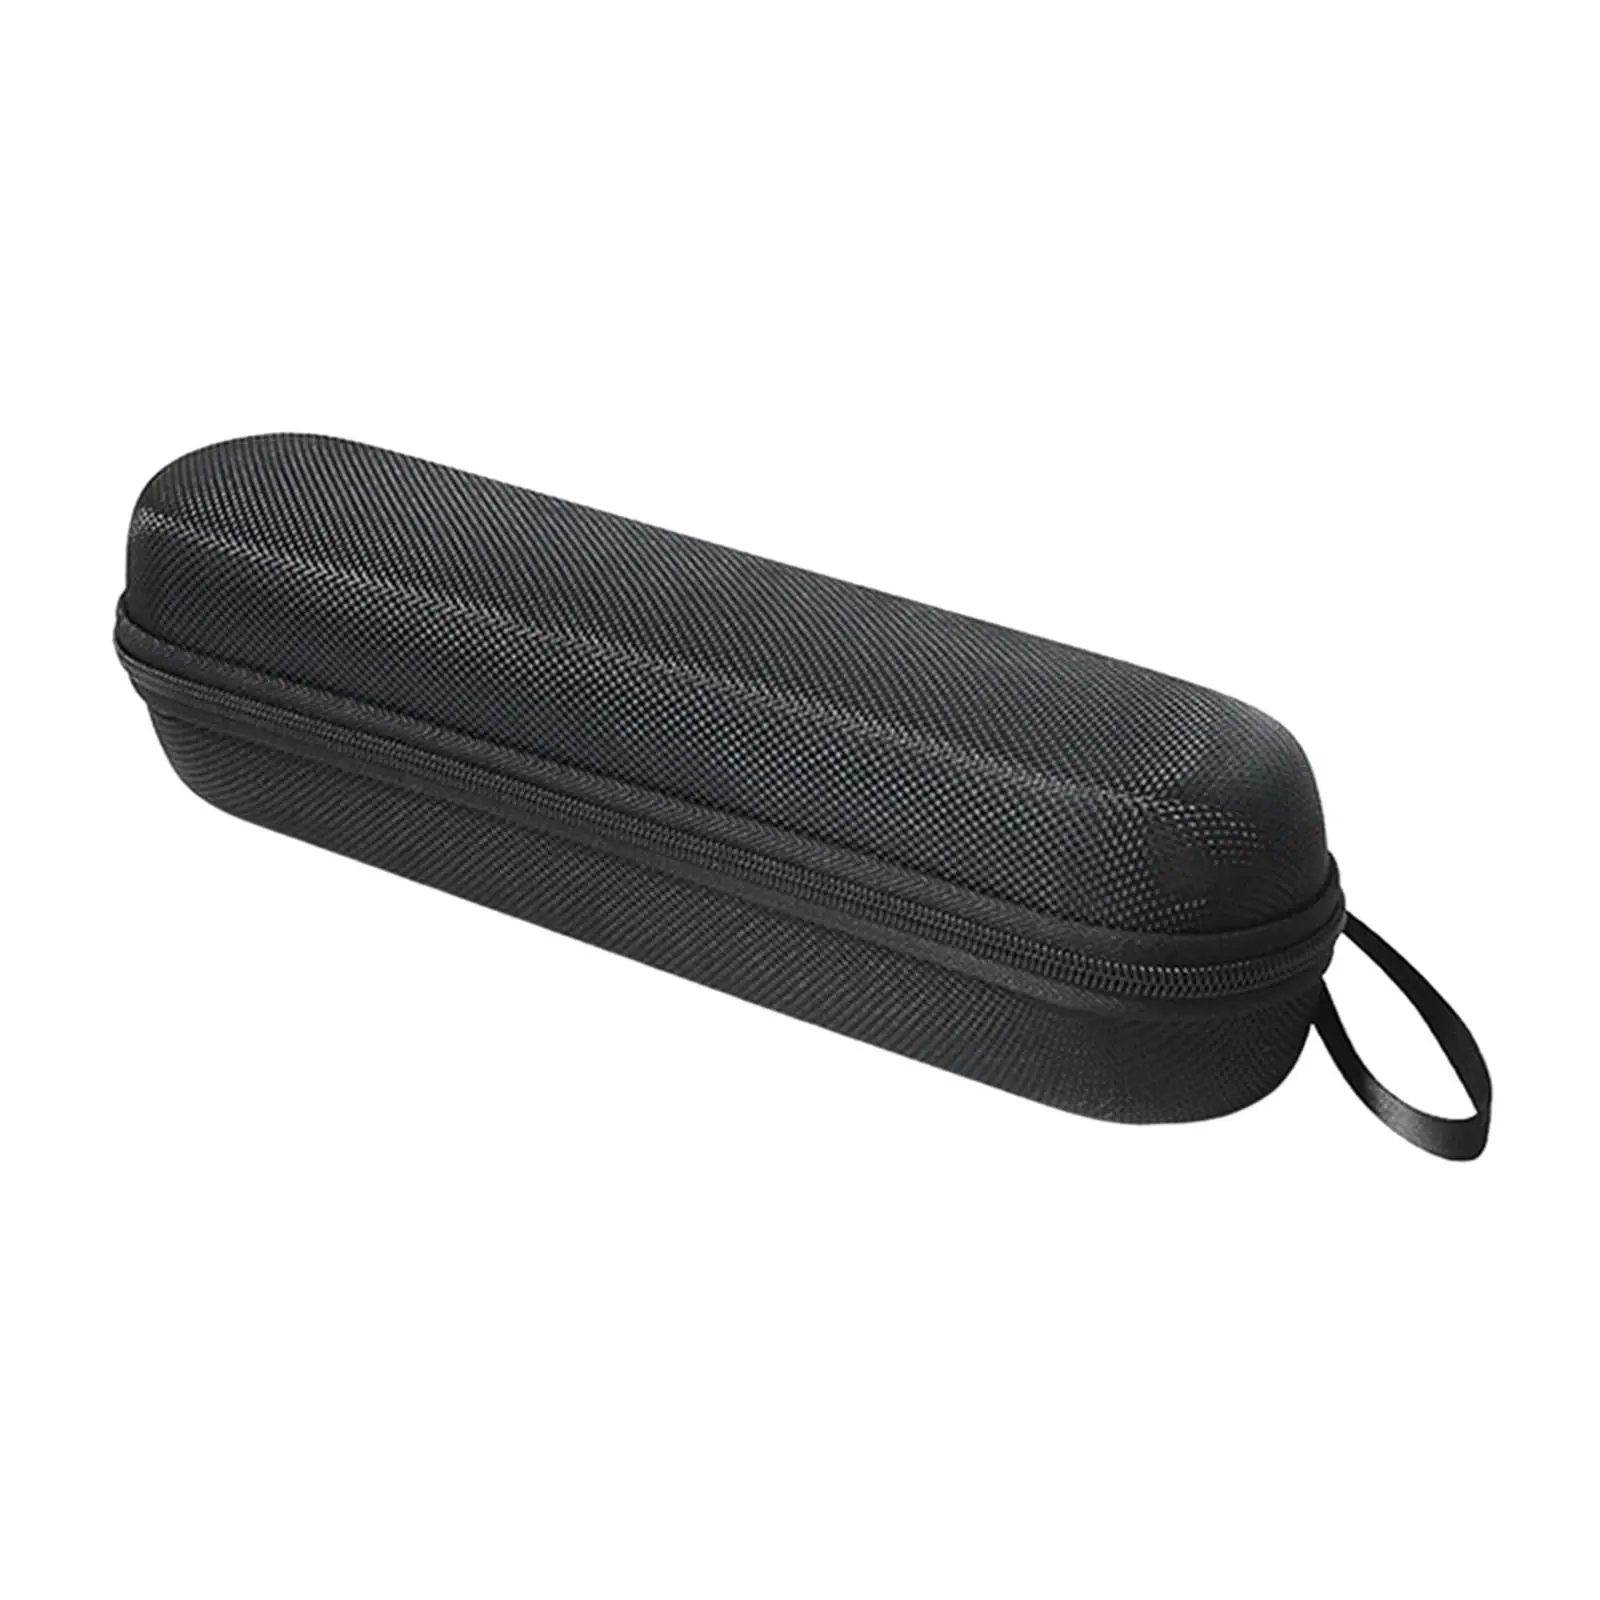 Toothbrush Travel Case Pressureproof Durable 278x70x70mm Easy to Carry Waterproof Storage Holder Bag EVA Protective Storage Bag